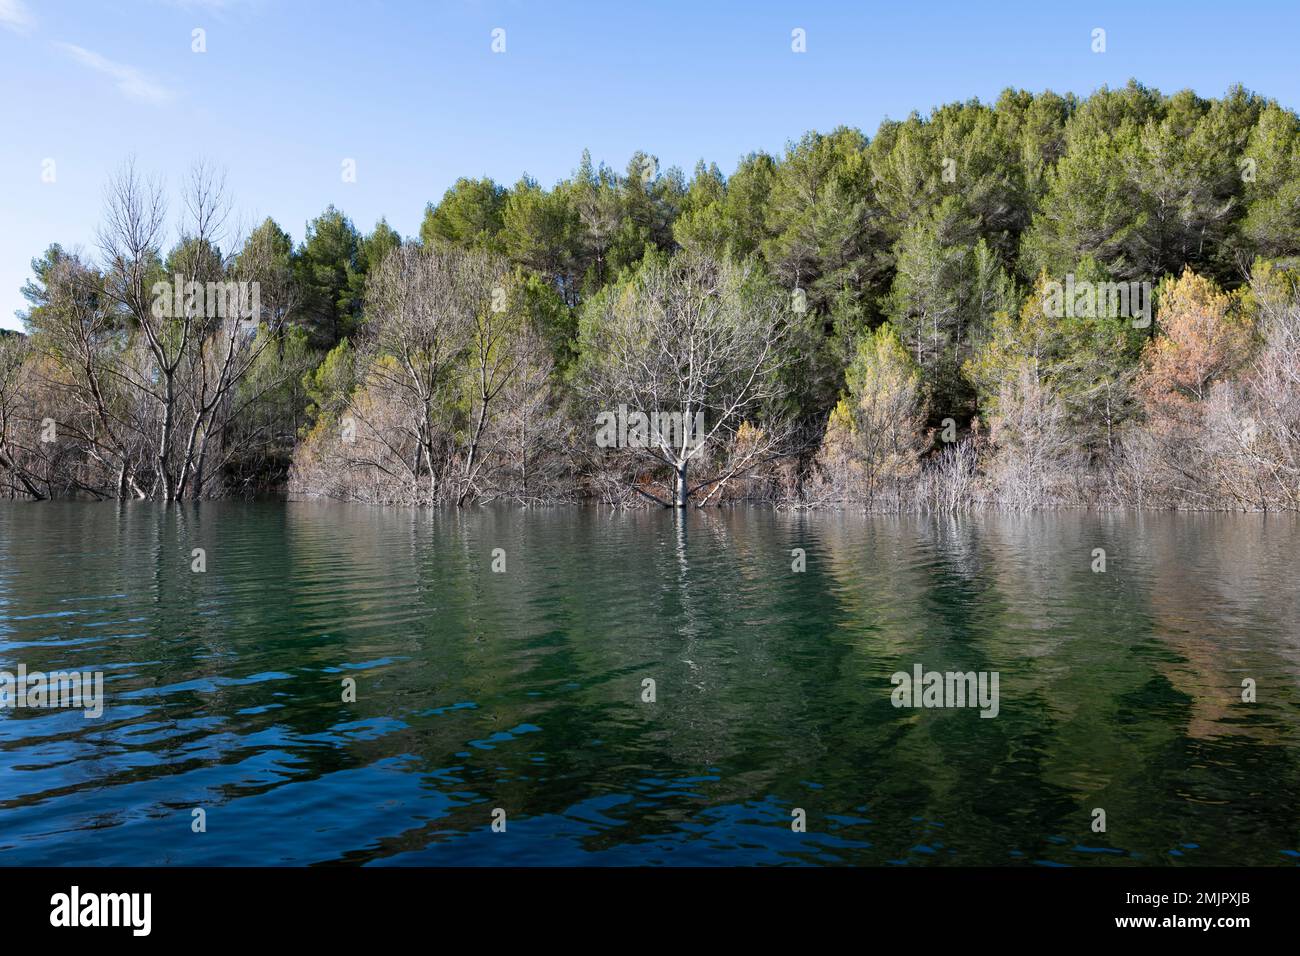 Forest and trees in the water of the Cause, a river in the Bouches-du-Rhône, France. Stock Photo